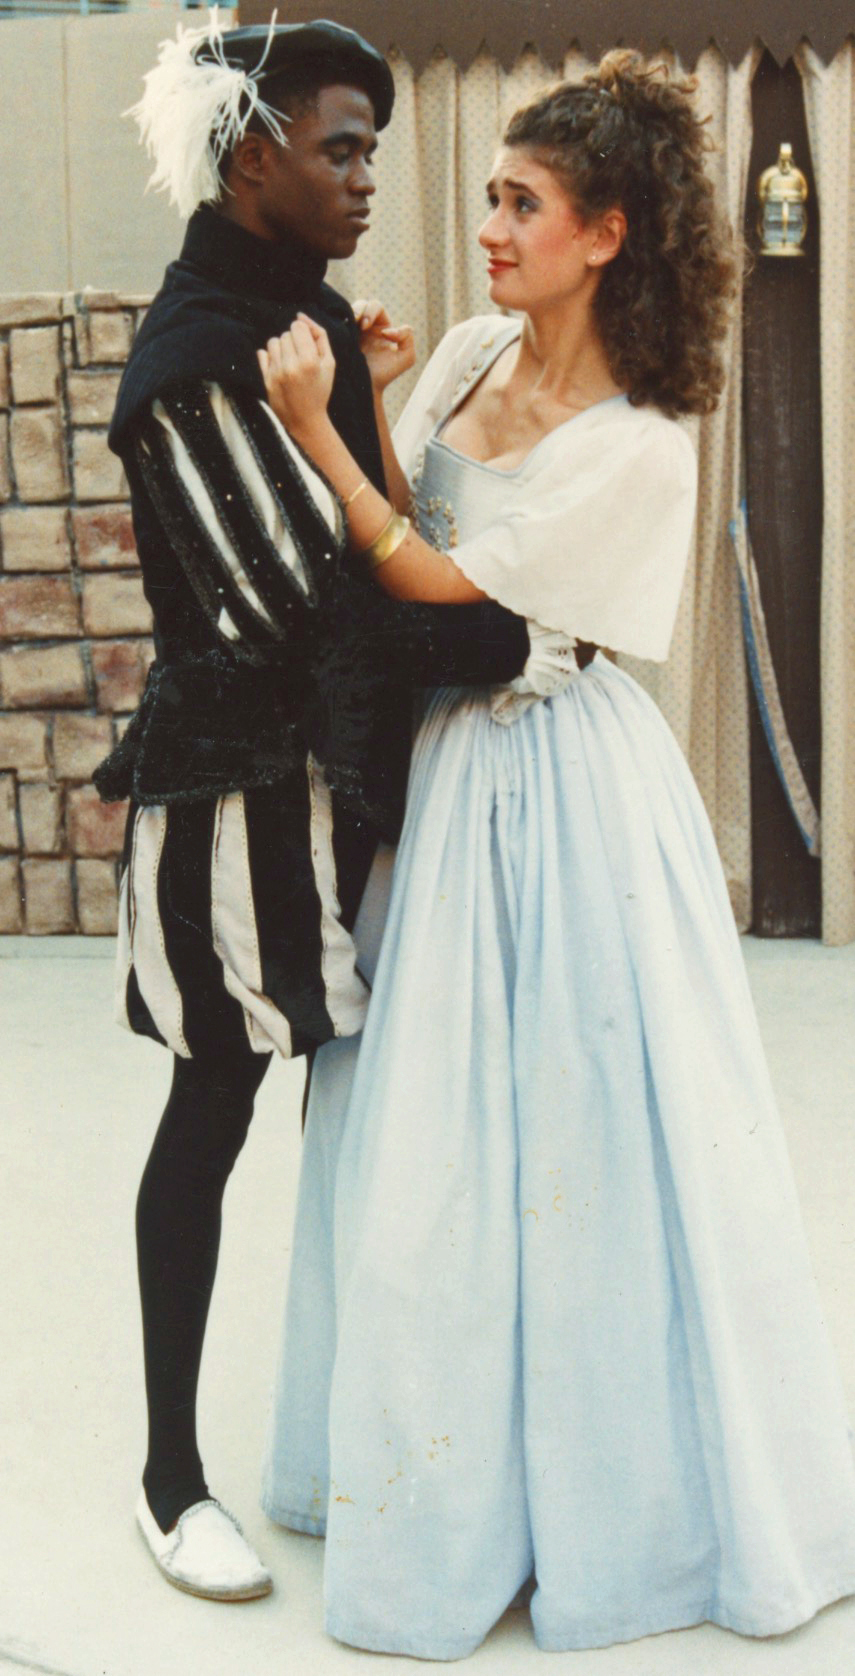 Wayne Brady plays the role of Iachimo in Shakespeare's Cymbeline during a Dr. Phillips High school theatrical production in 1989. Pictured with Brady is Lauren Ronat. (Courtesy photo)